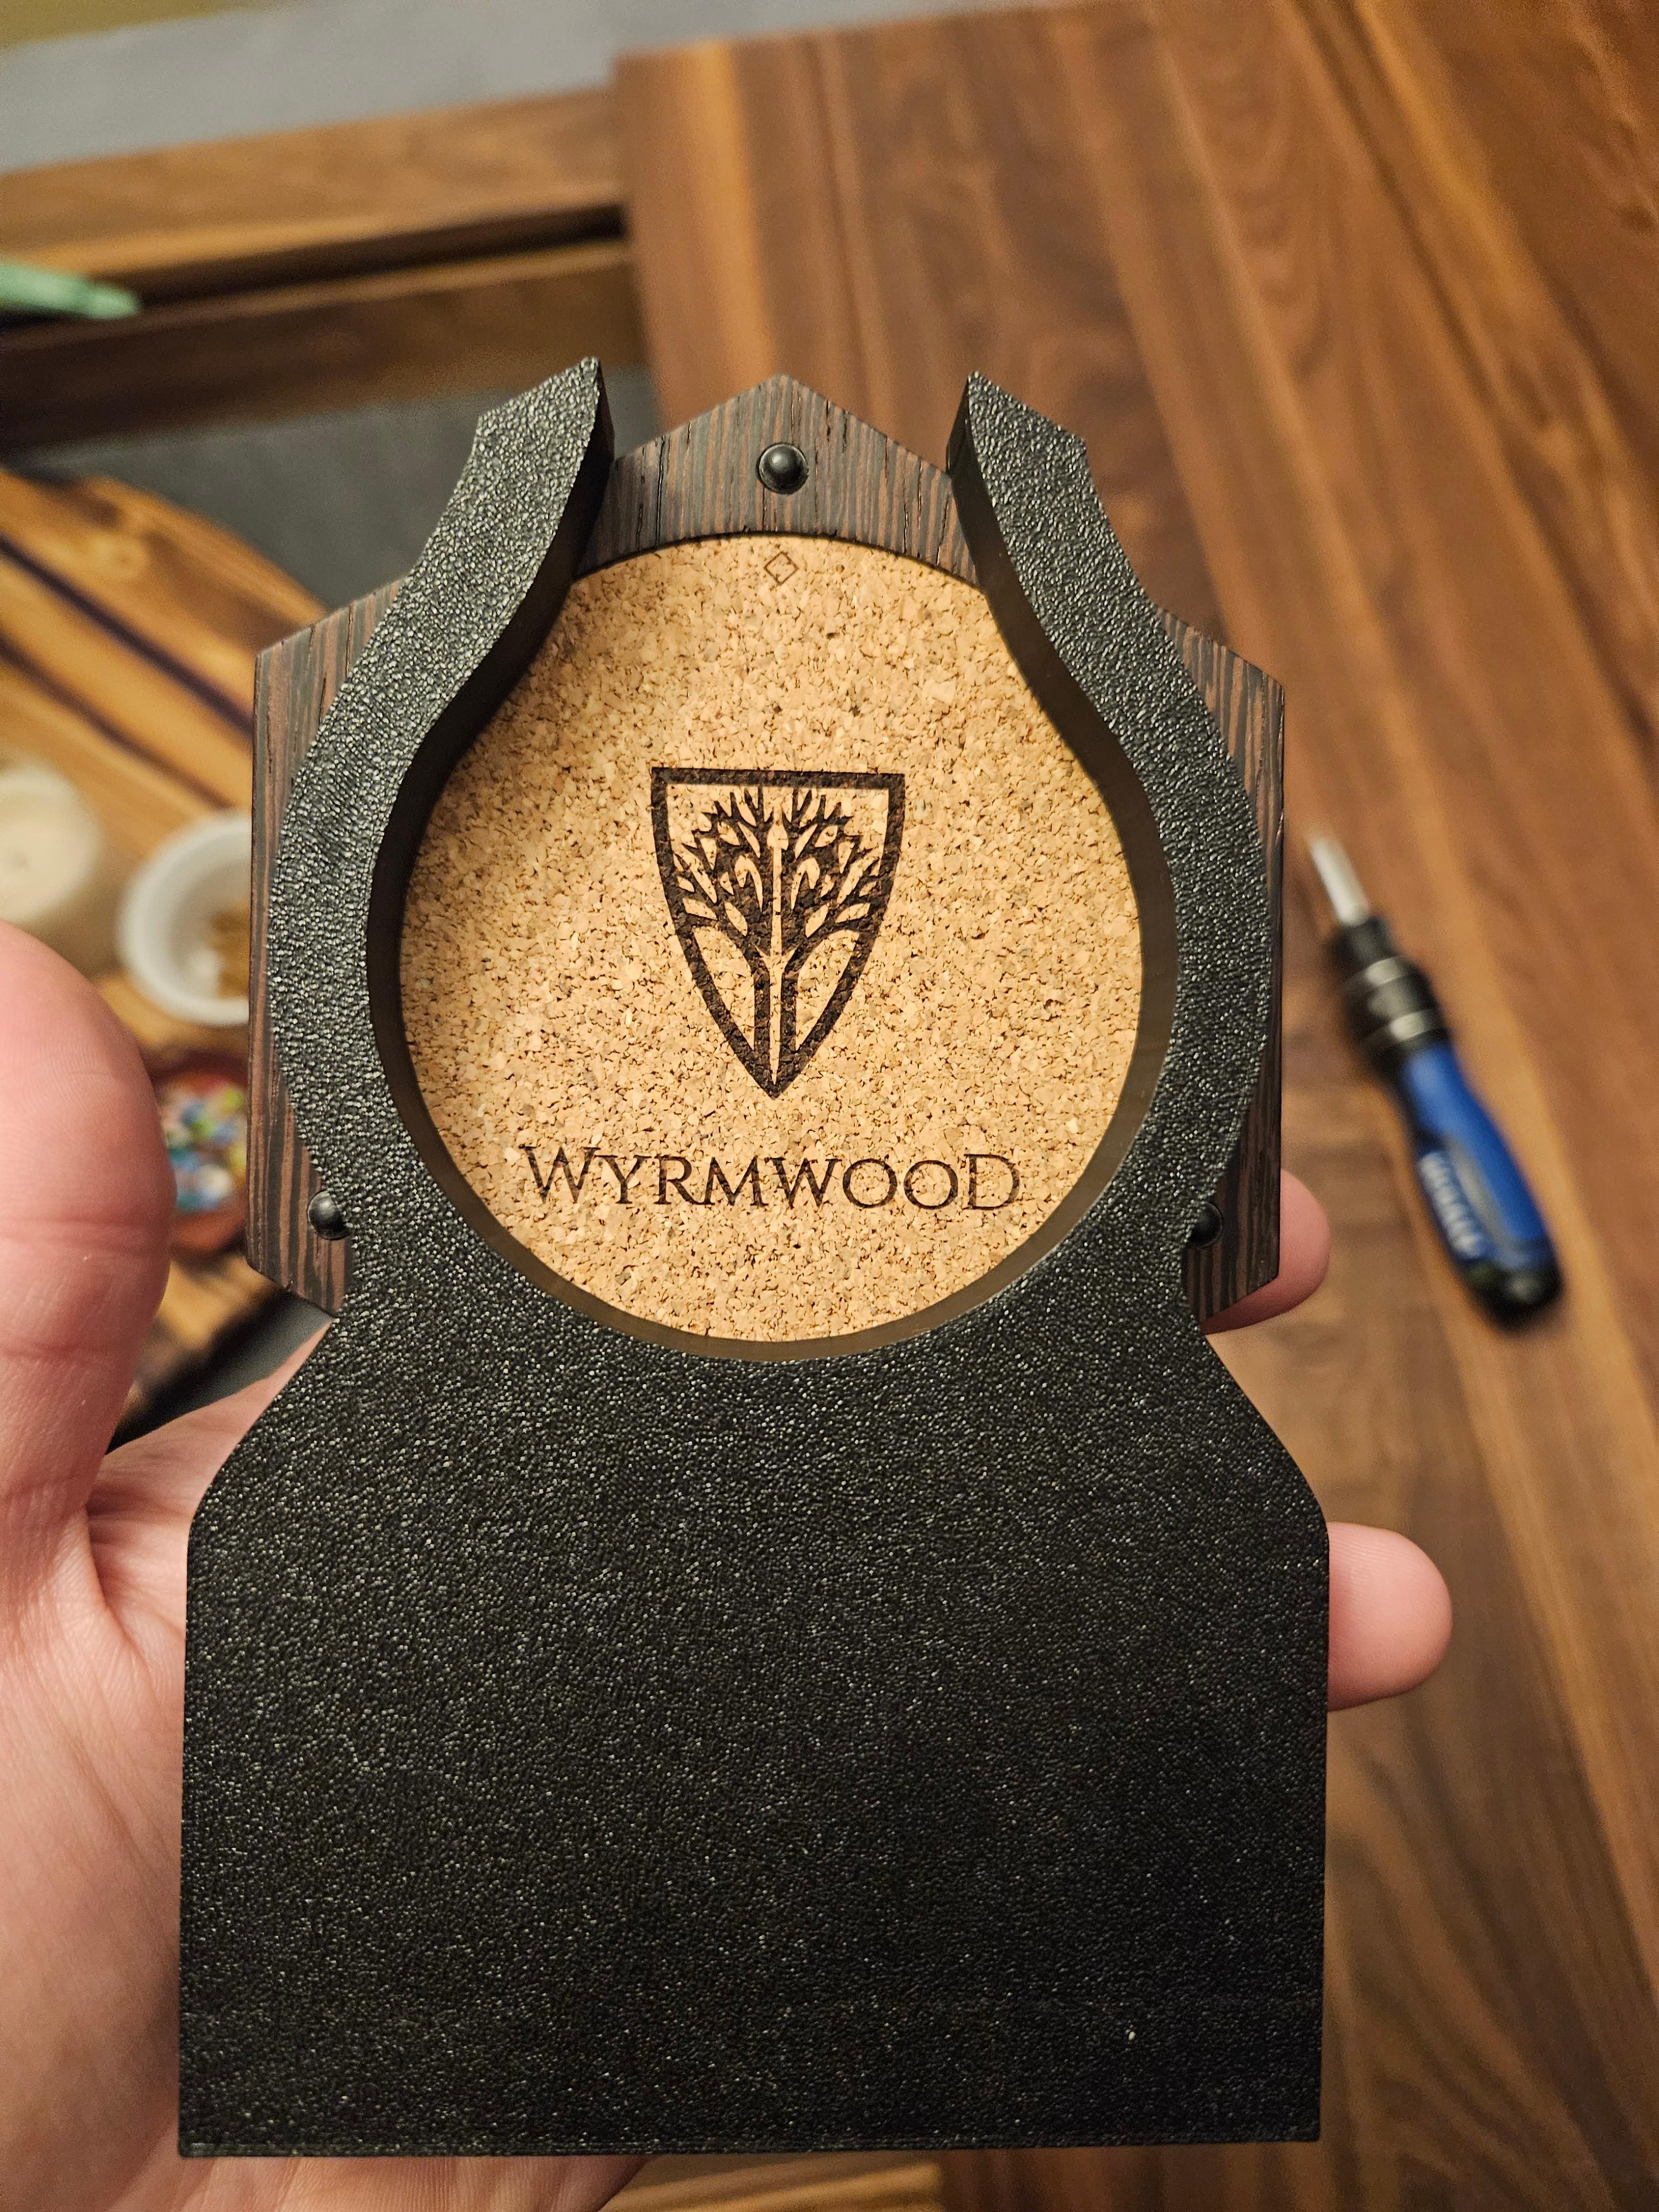 Wyrmwood Table Accessory - Hex tile cup holder.stl 3d model